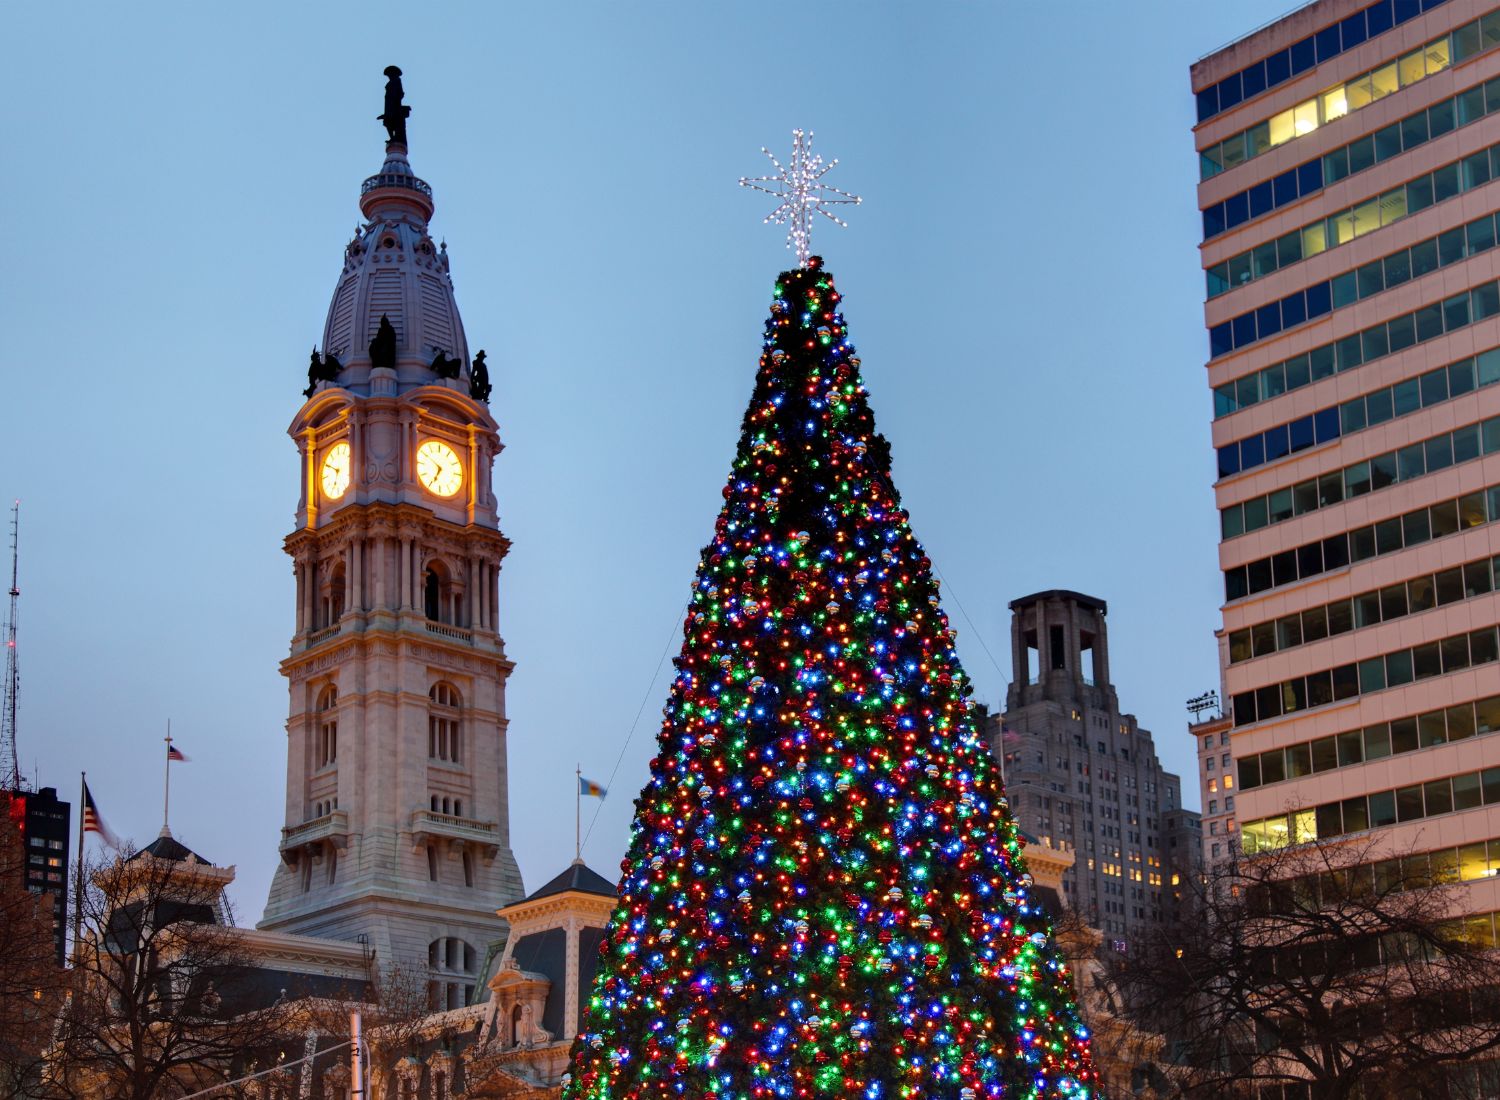 Philadelphia for the holidays: What to do and where to go